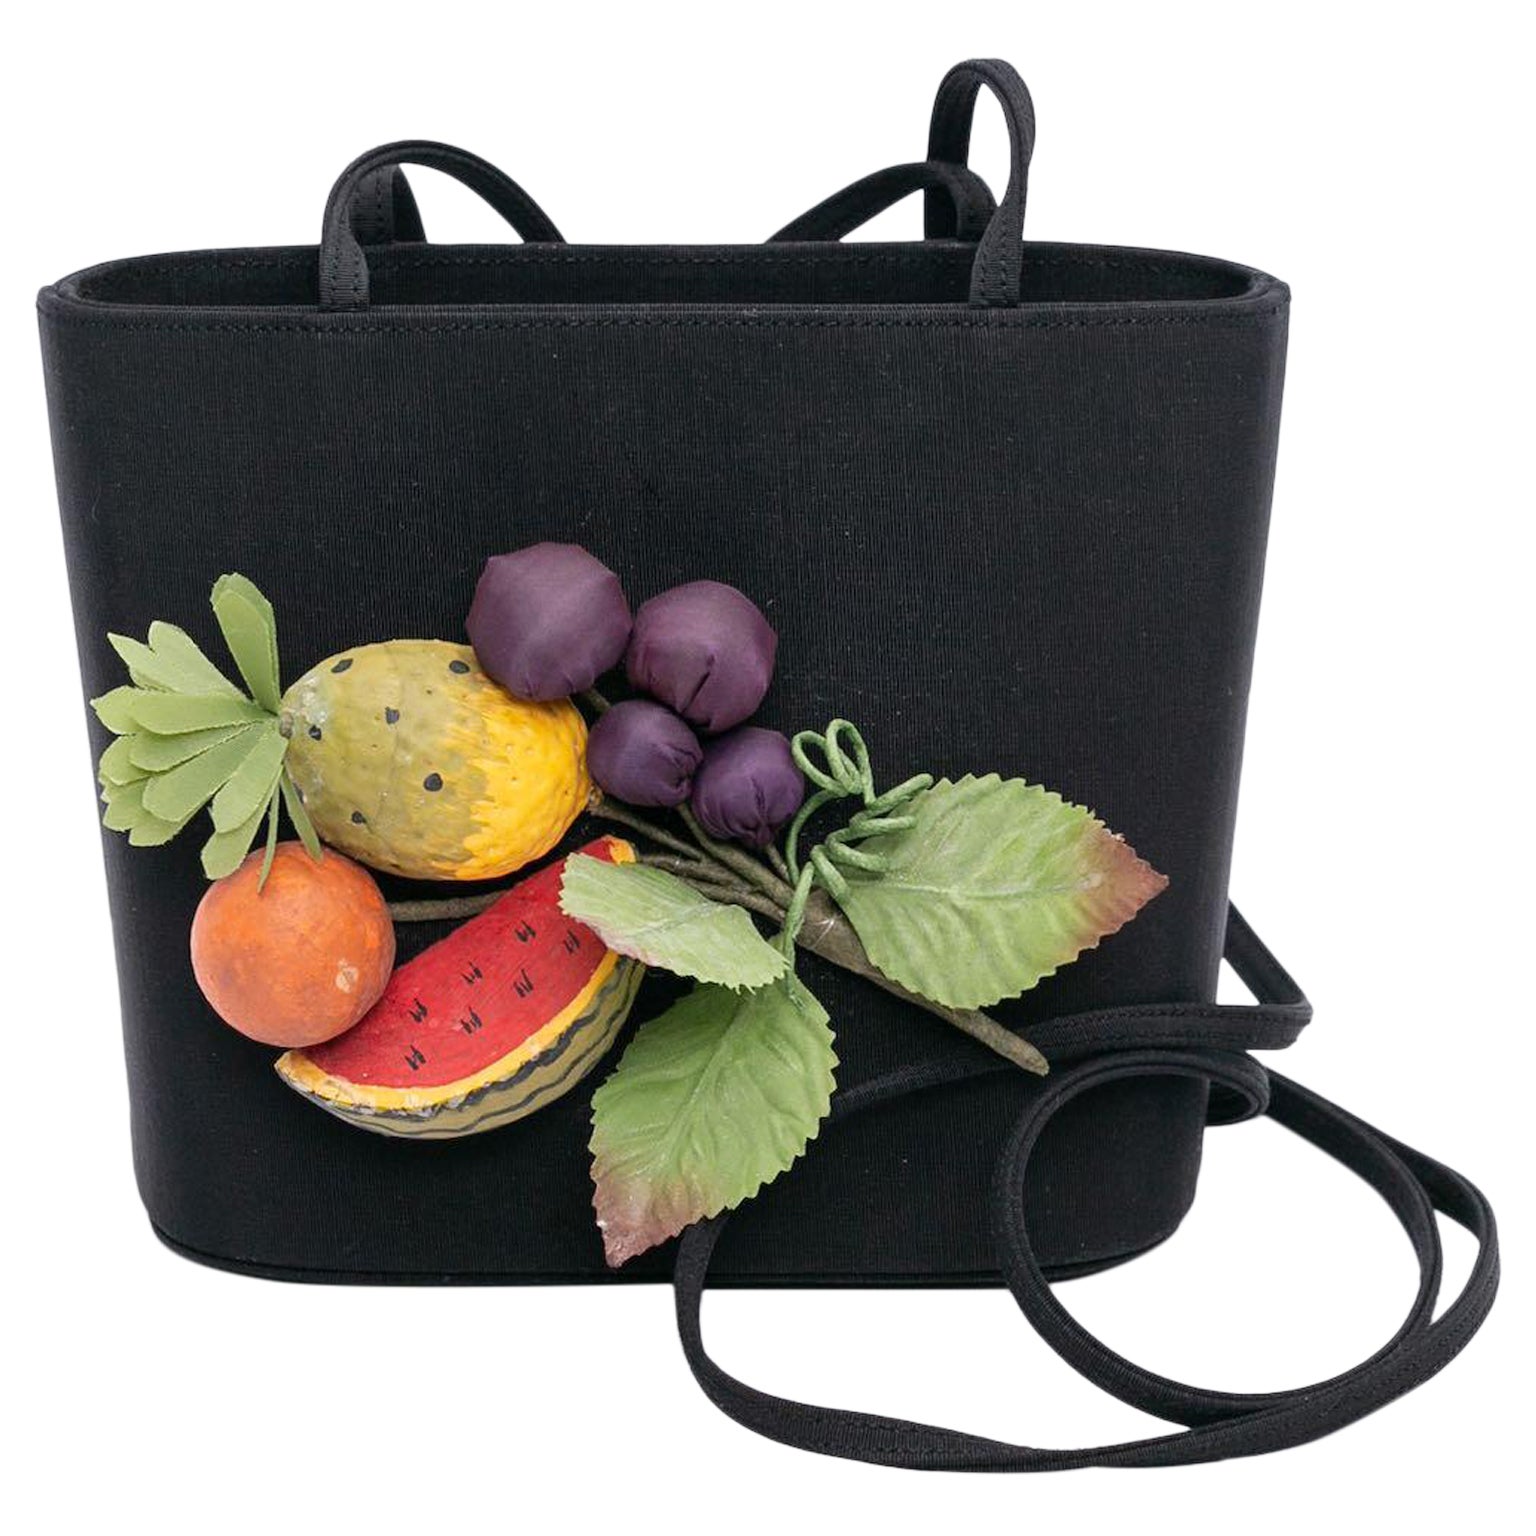 Andrea Pfister Fruits Bag in Black Fabric For Sale